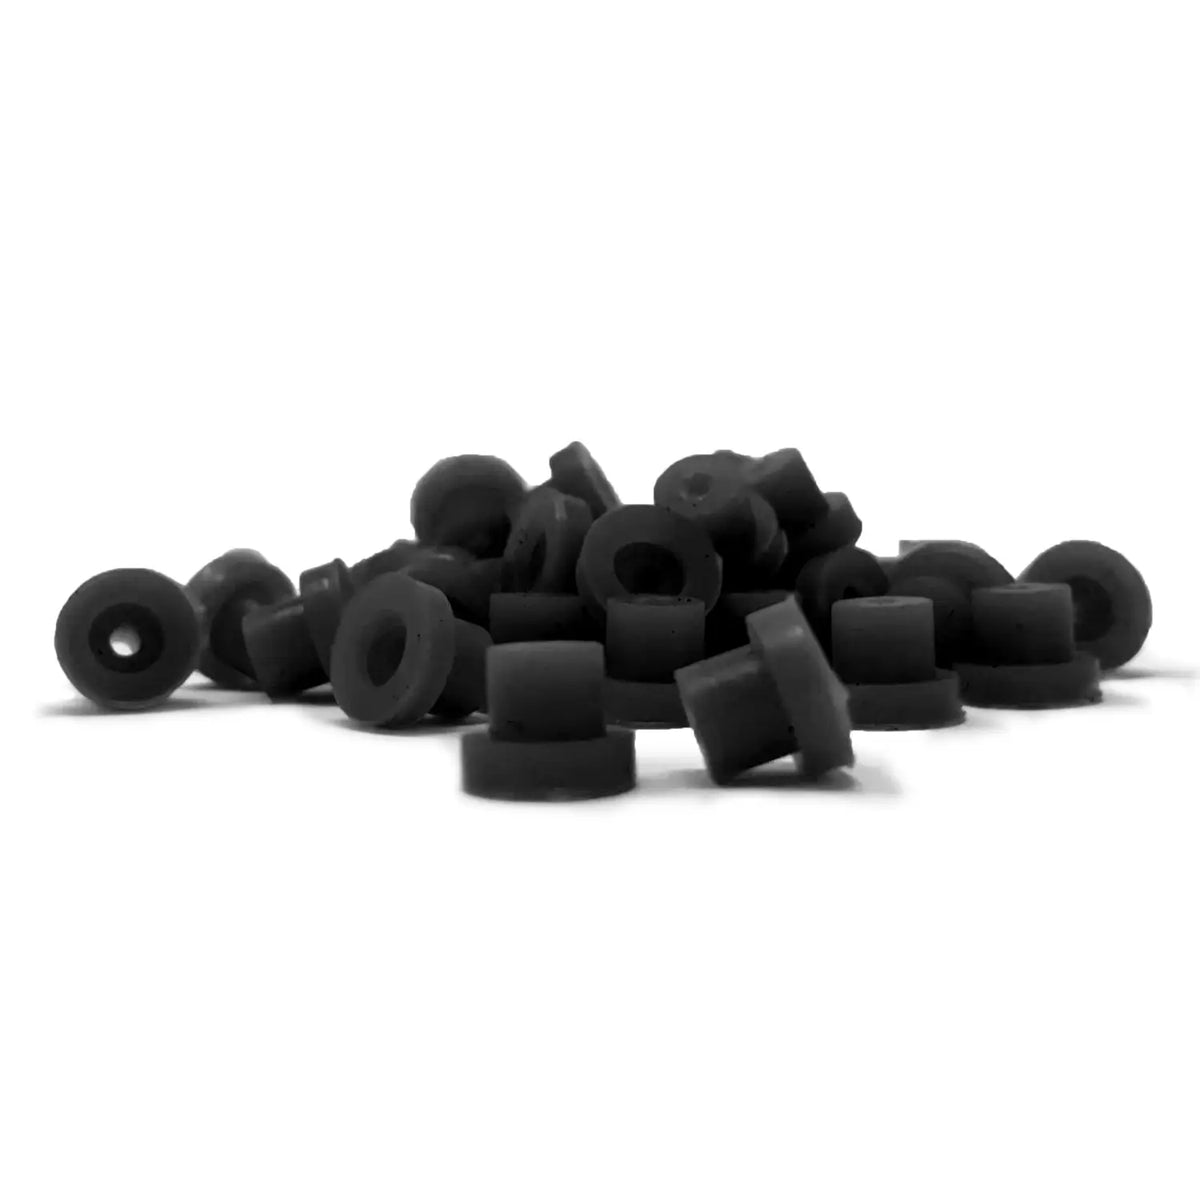 Black Grommets / Nipples for Tattoo Machines